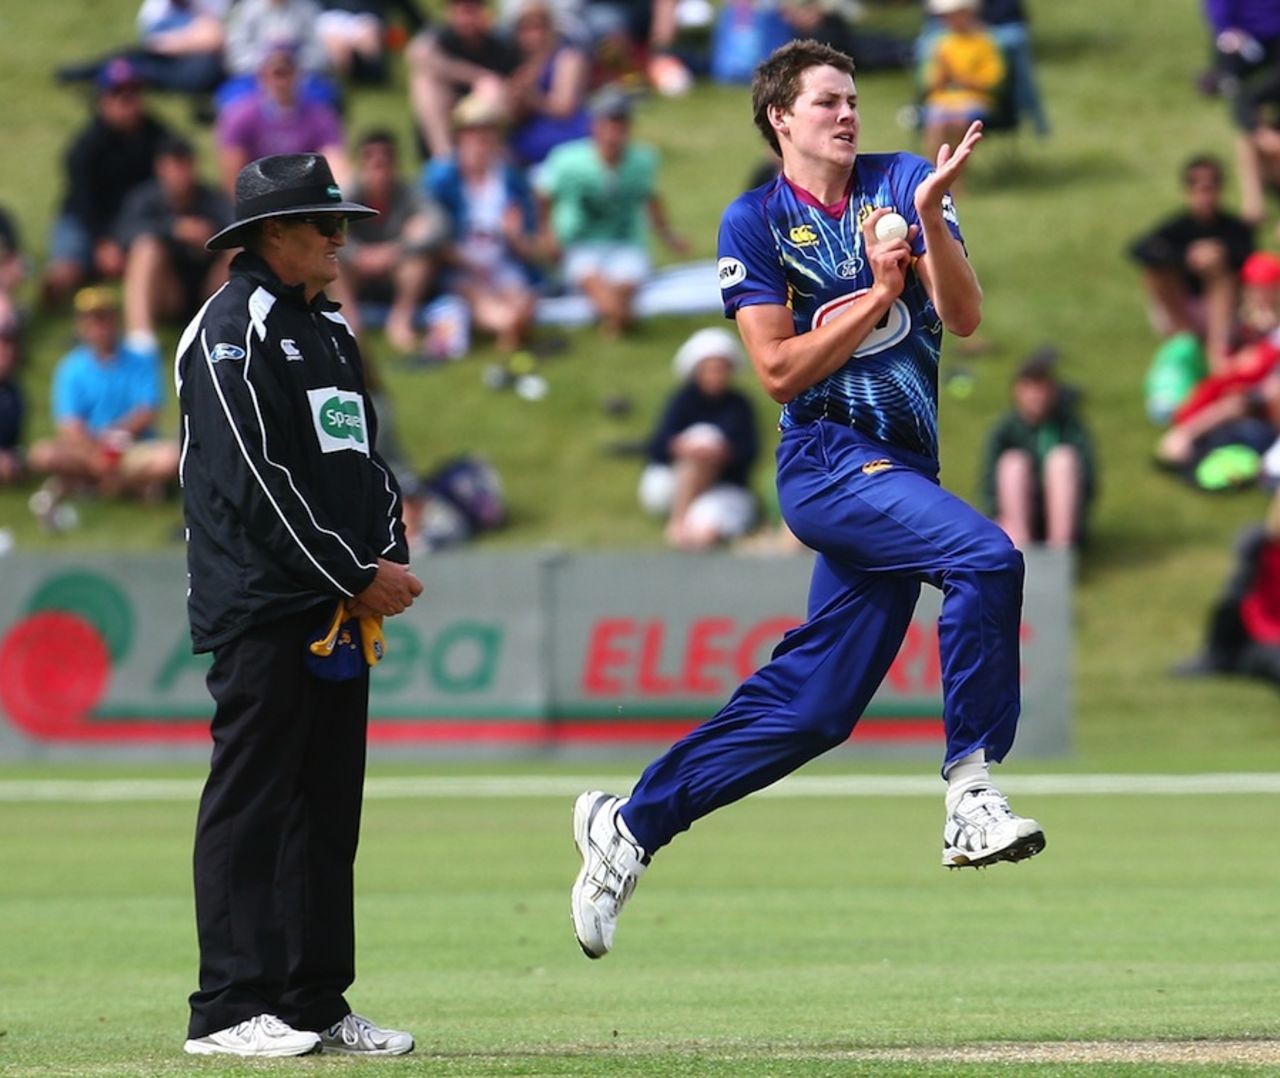 Jacob Duffy leaps on his delivery stride, Otago v Auckland, HRV Cup 2012-13, Queenstown, December 31, 2012